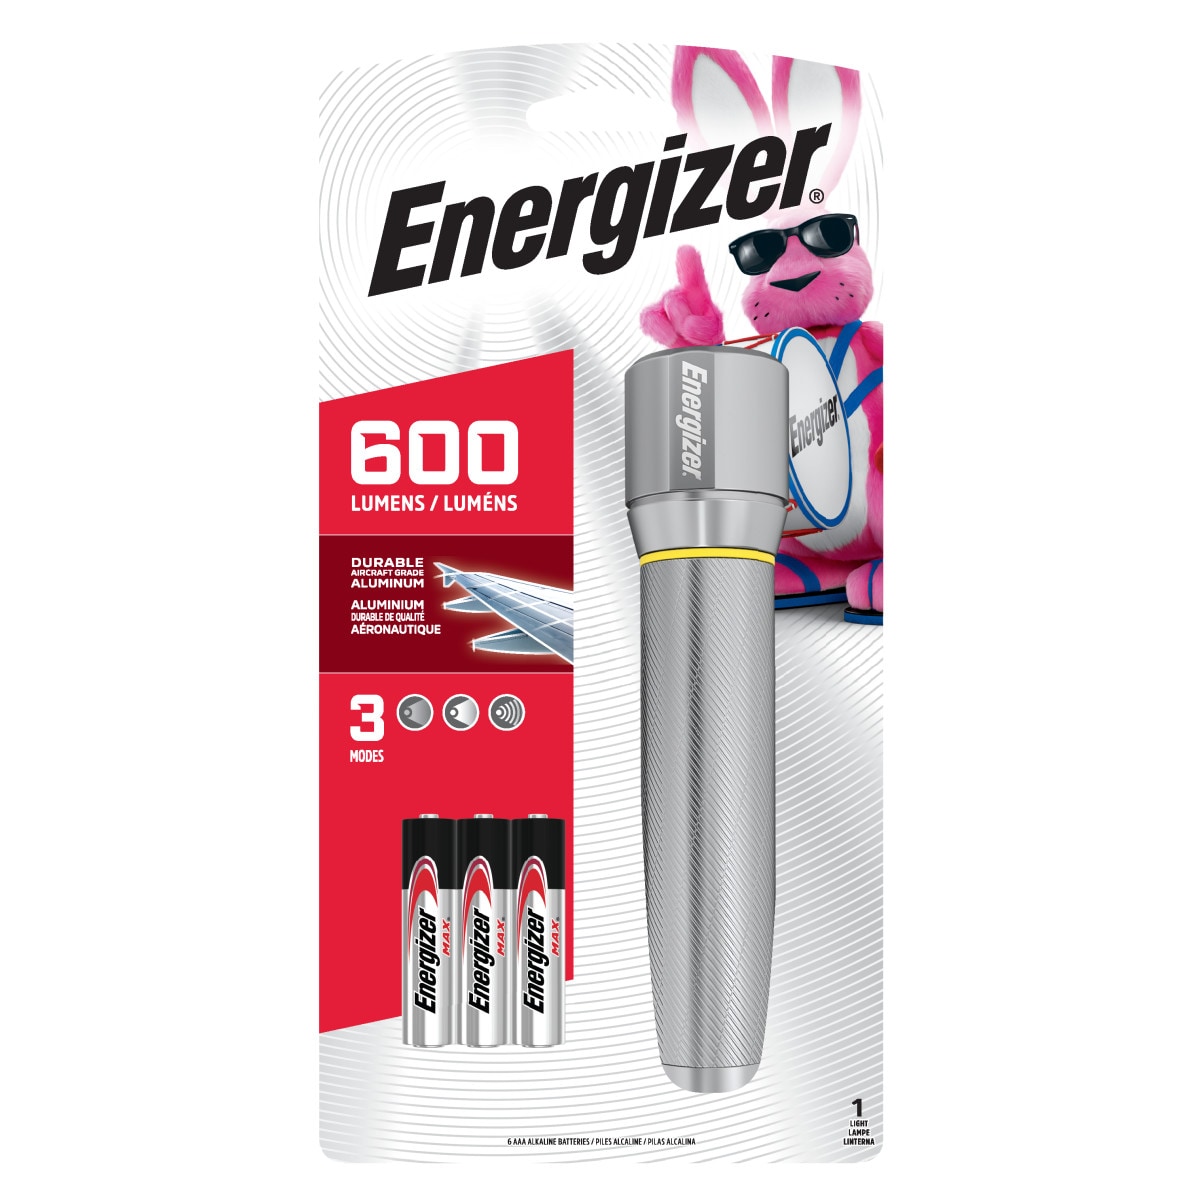 department Battery Mode 600-Lumen Flashlight Vision (AAA the at Included) LED 1 Flashlights in Energizer